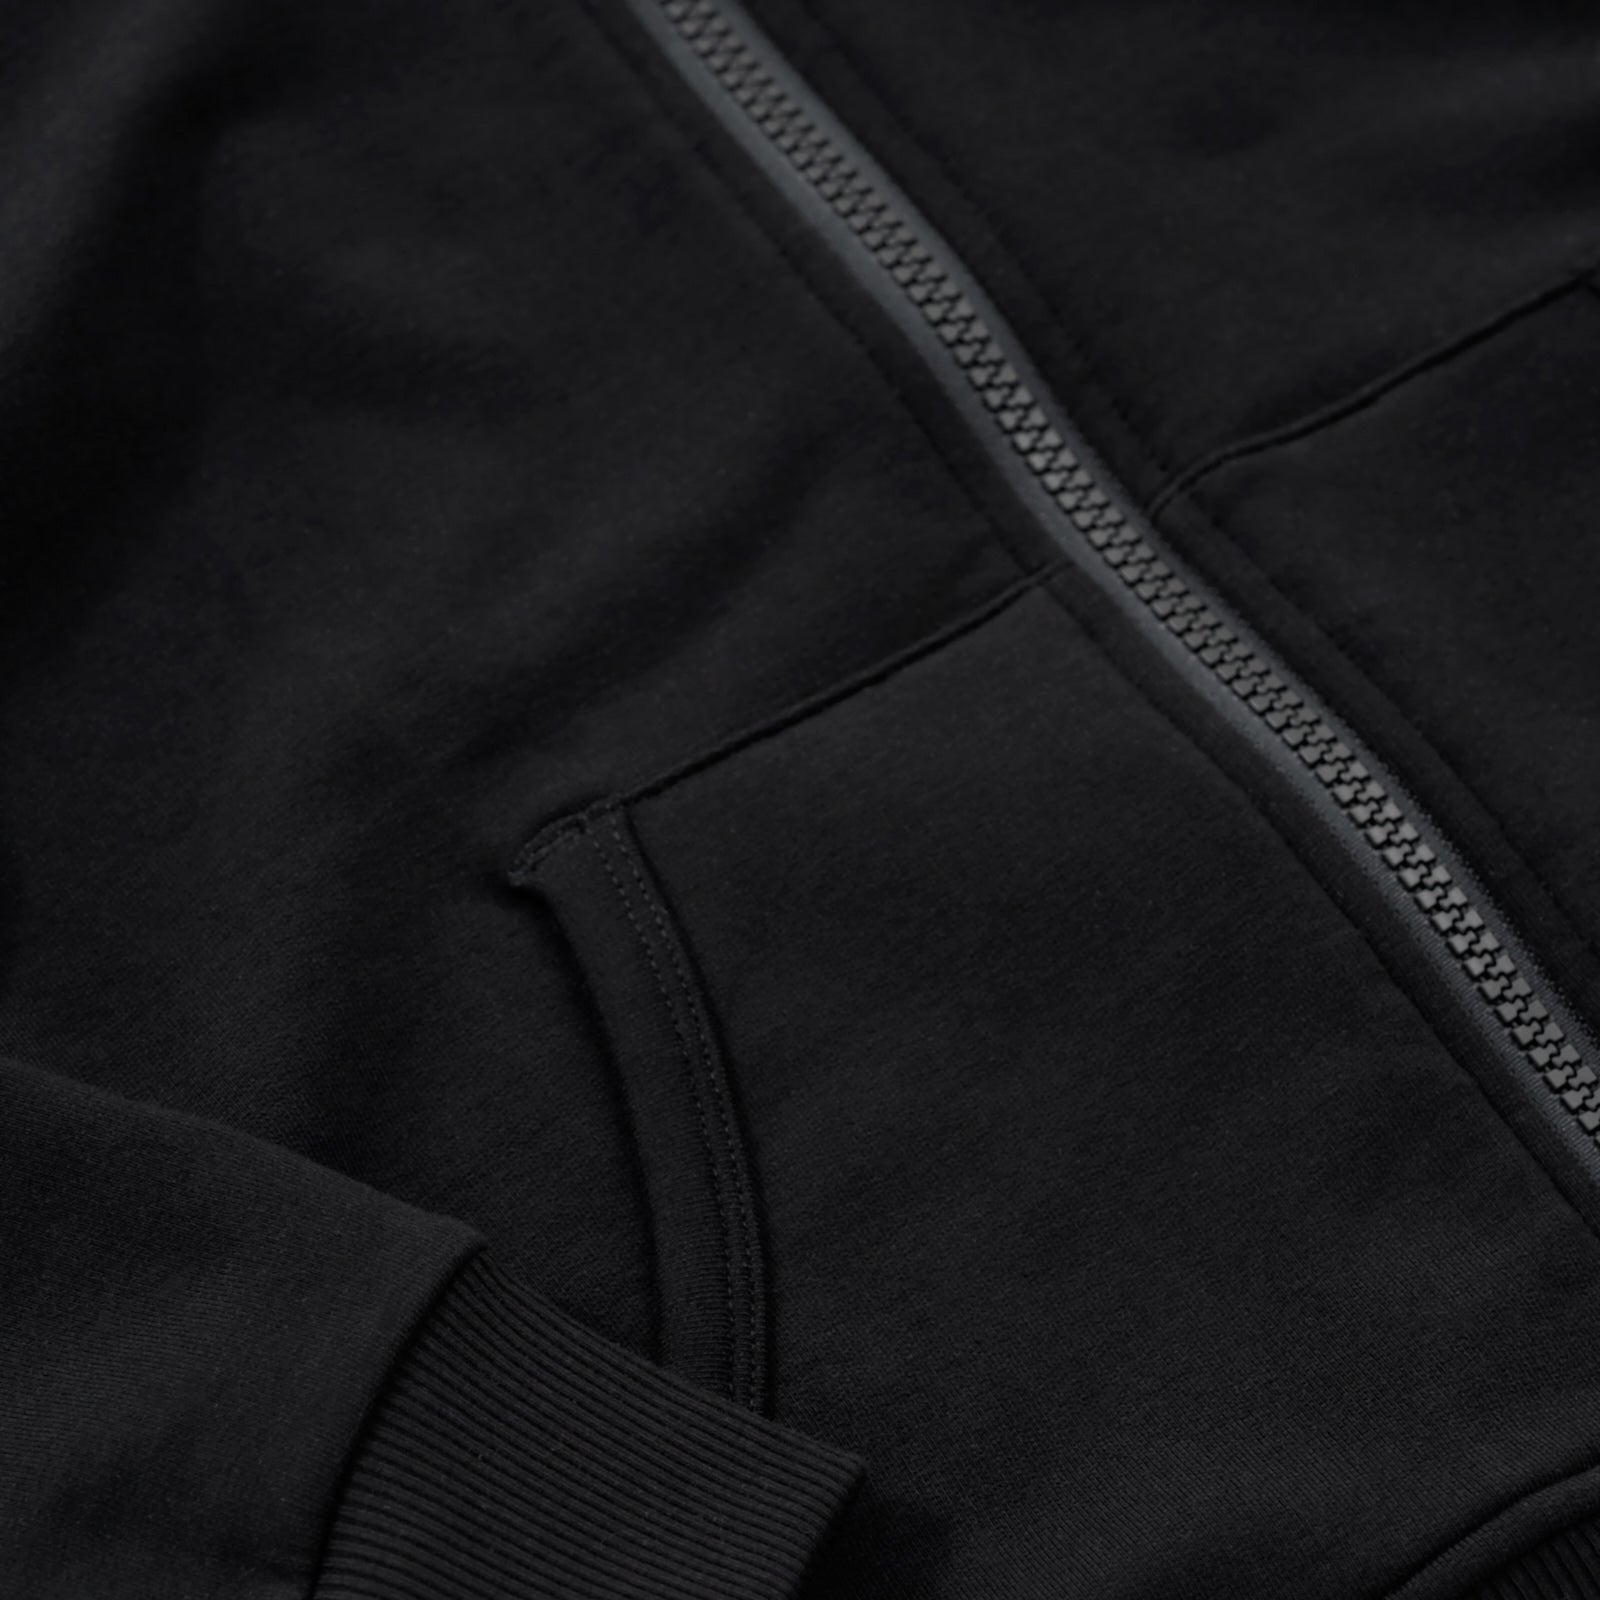 Close up detail on the pocket detail on the Black Zip Hoodie